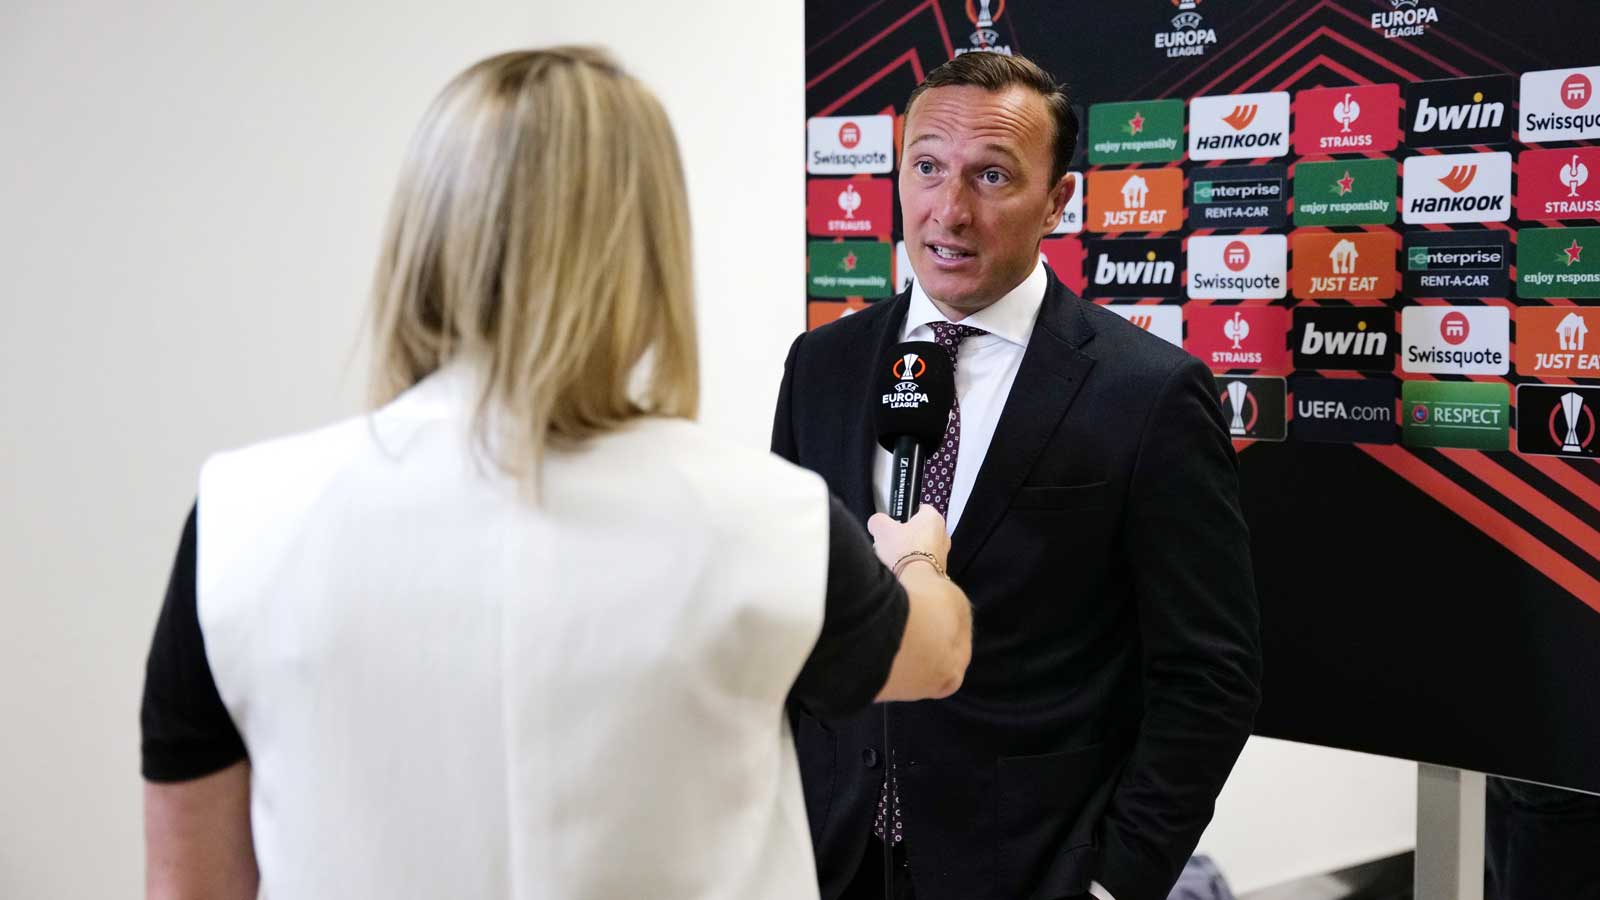 Mark Noble is interviewed at the UEFA Europa League draw